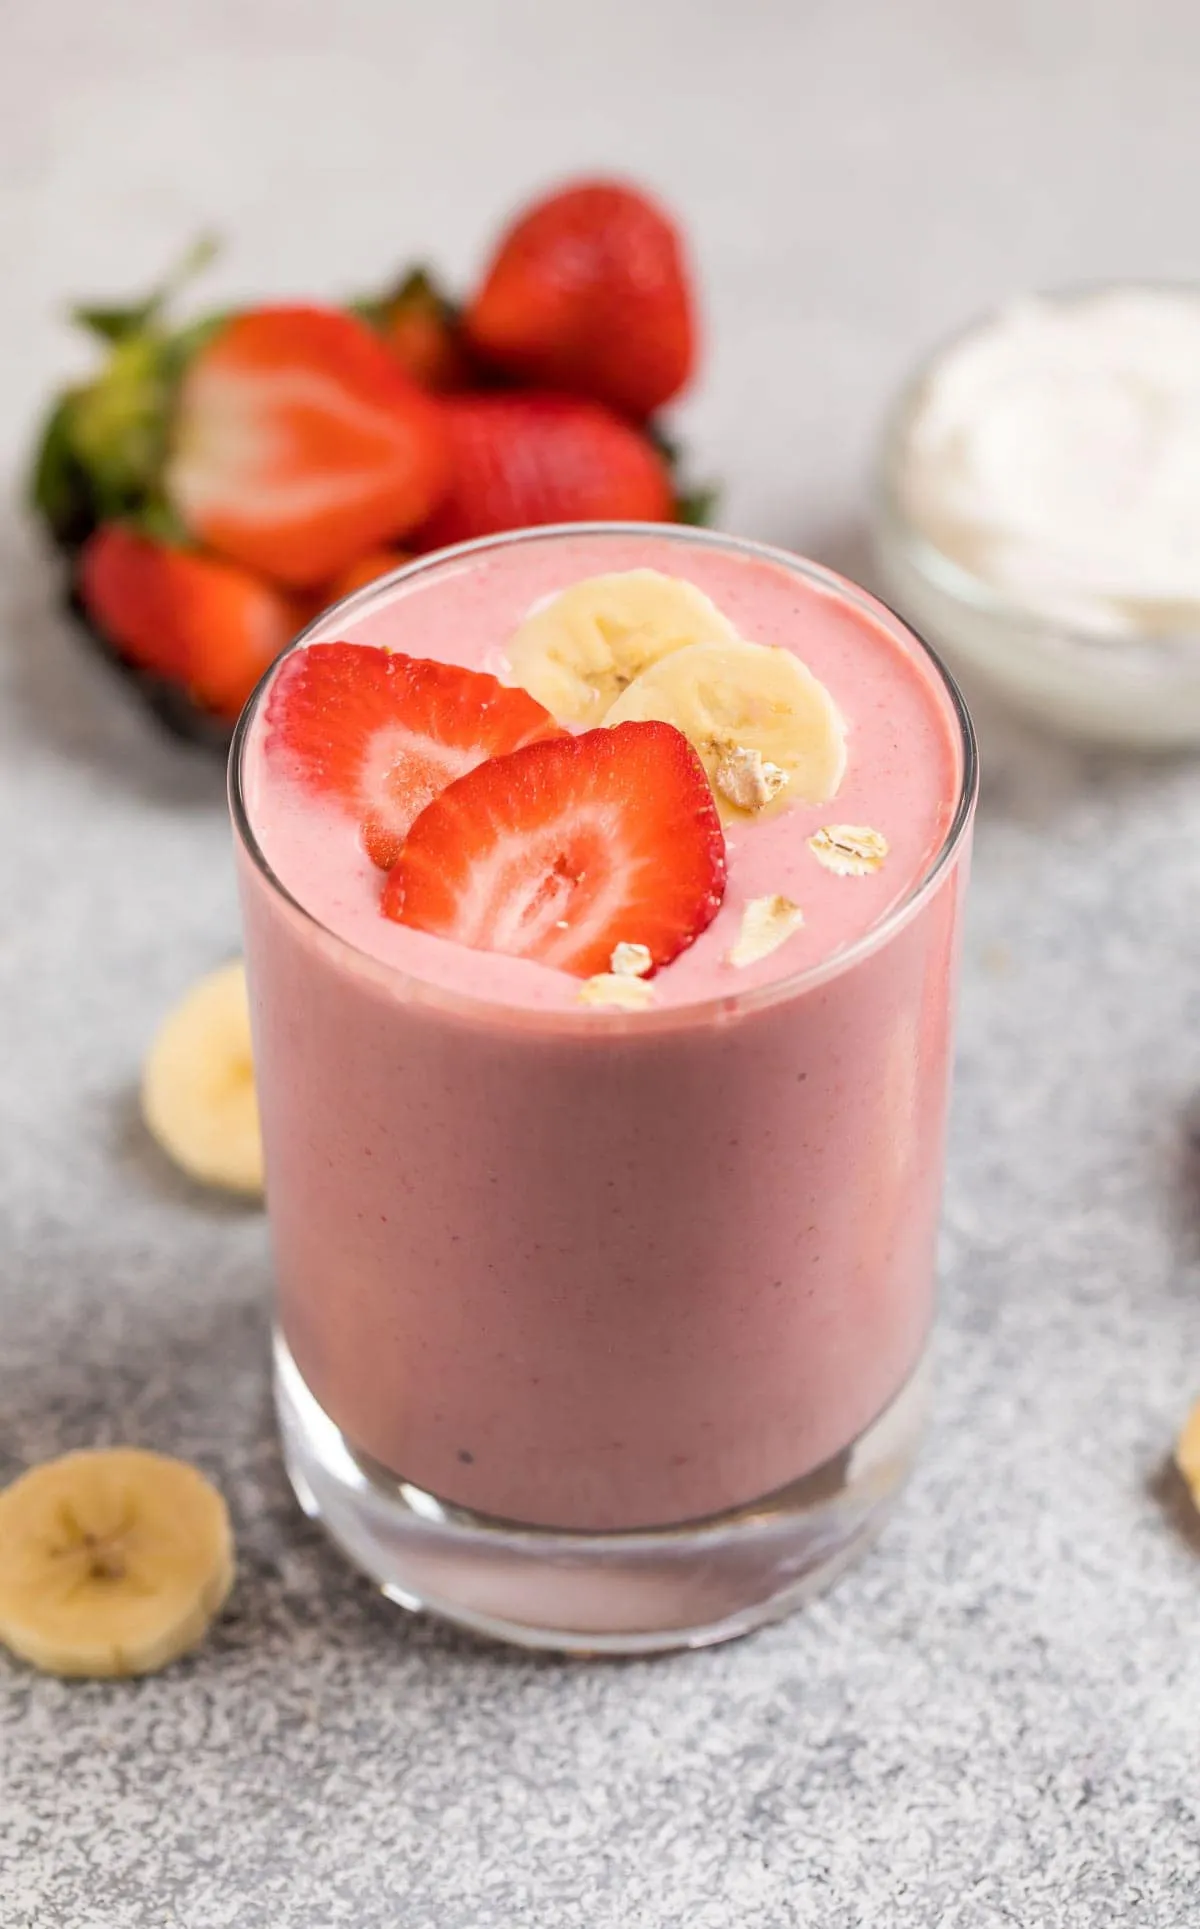 Greek yogurt smoothie in a glass with fresh strawberry and banana slices